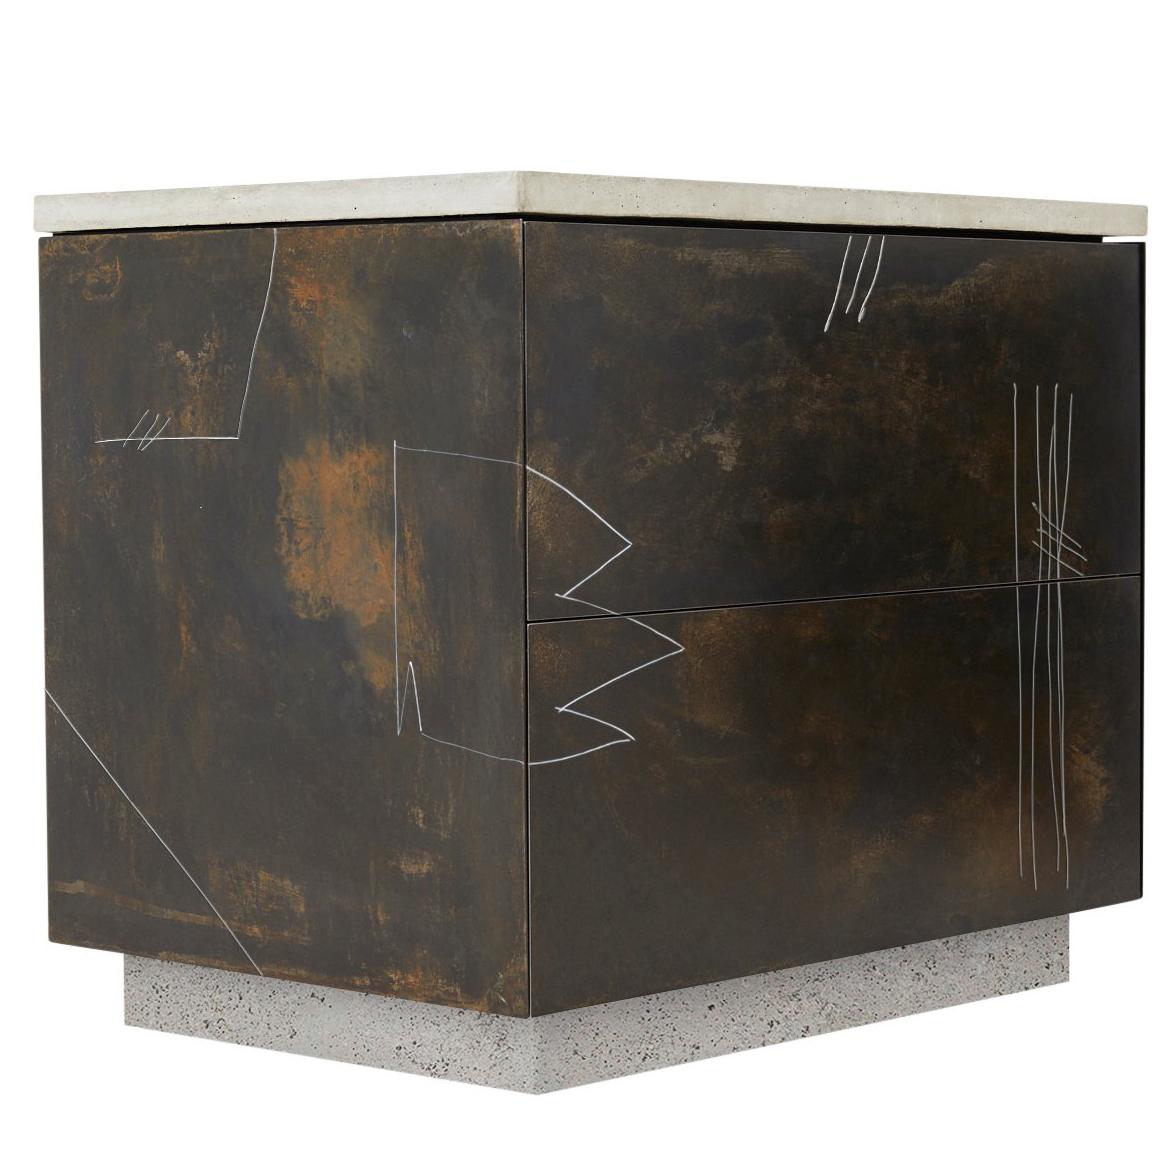 S.O. Side Table with Drawers and Drawn Faces in Walnut, Steel and Cast Concrete